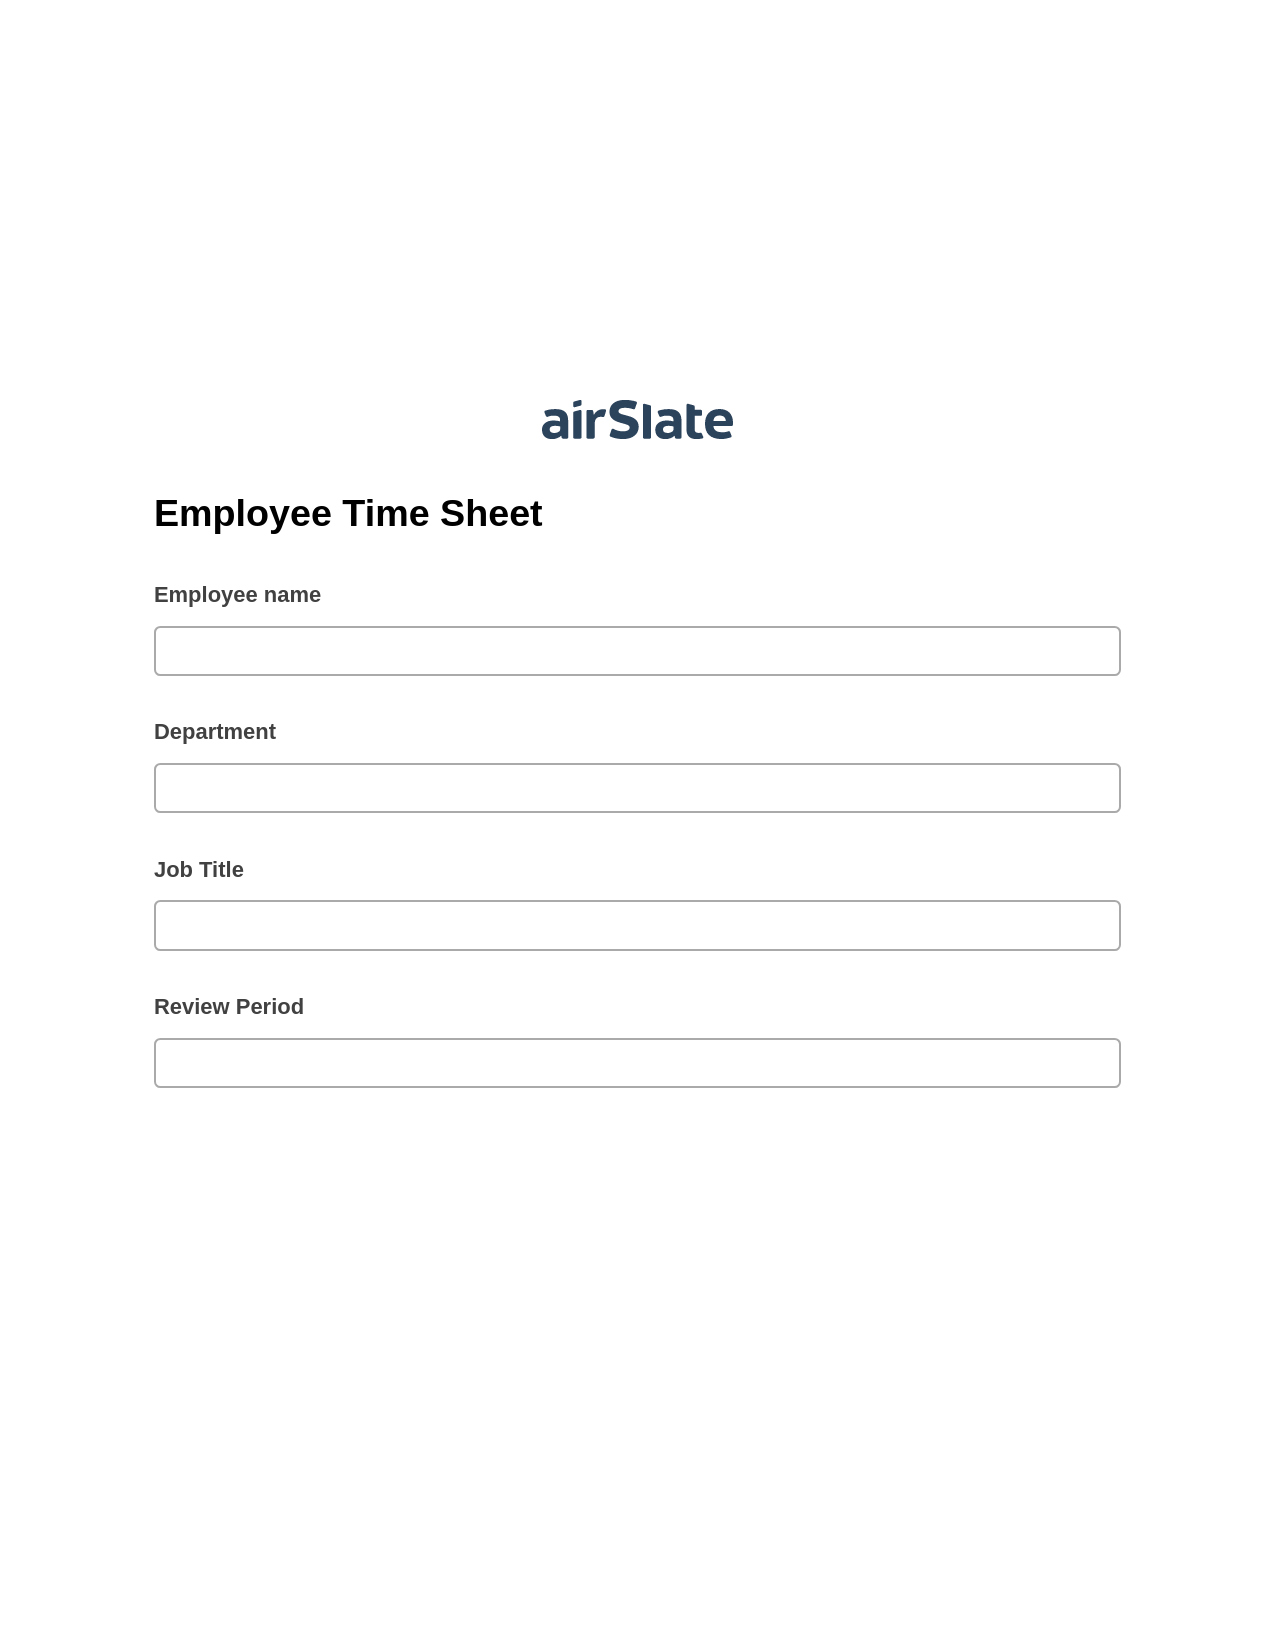 Employee Time Sheet Pre-fill from another Slate Bot, Slack Notification Bot, Export to Excel 365 Bot